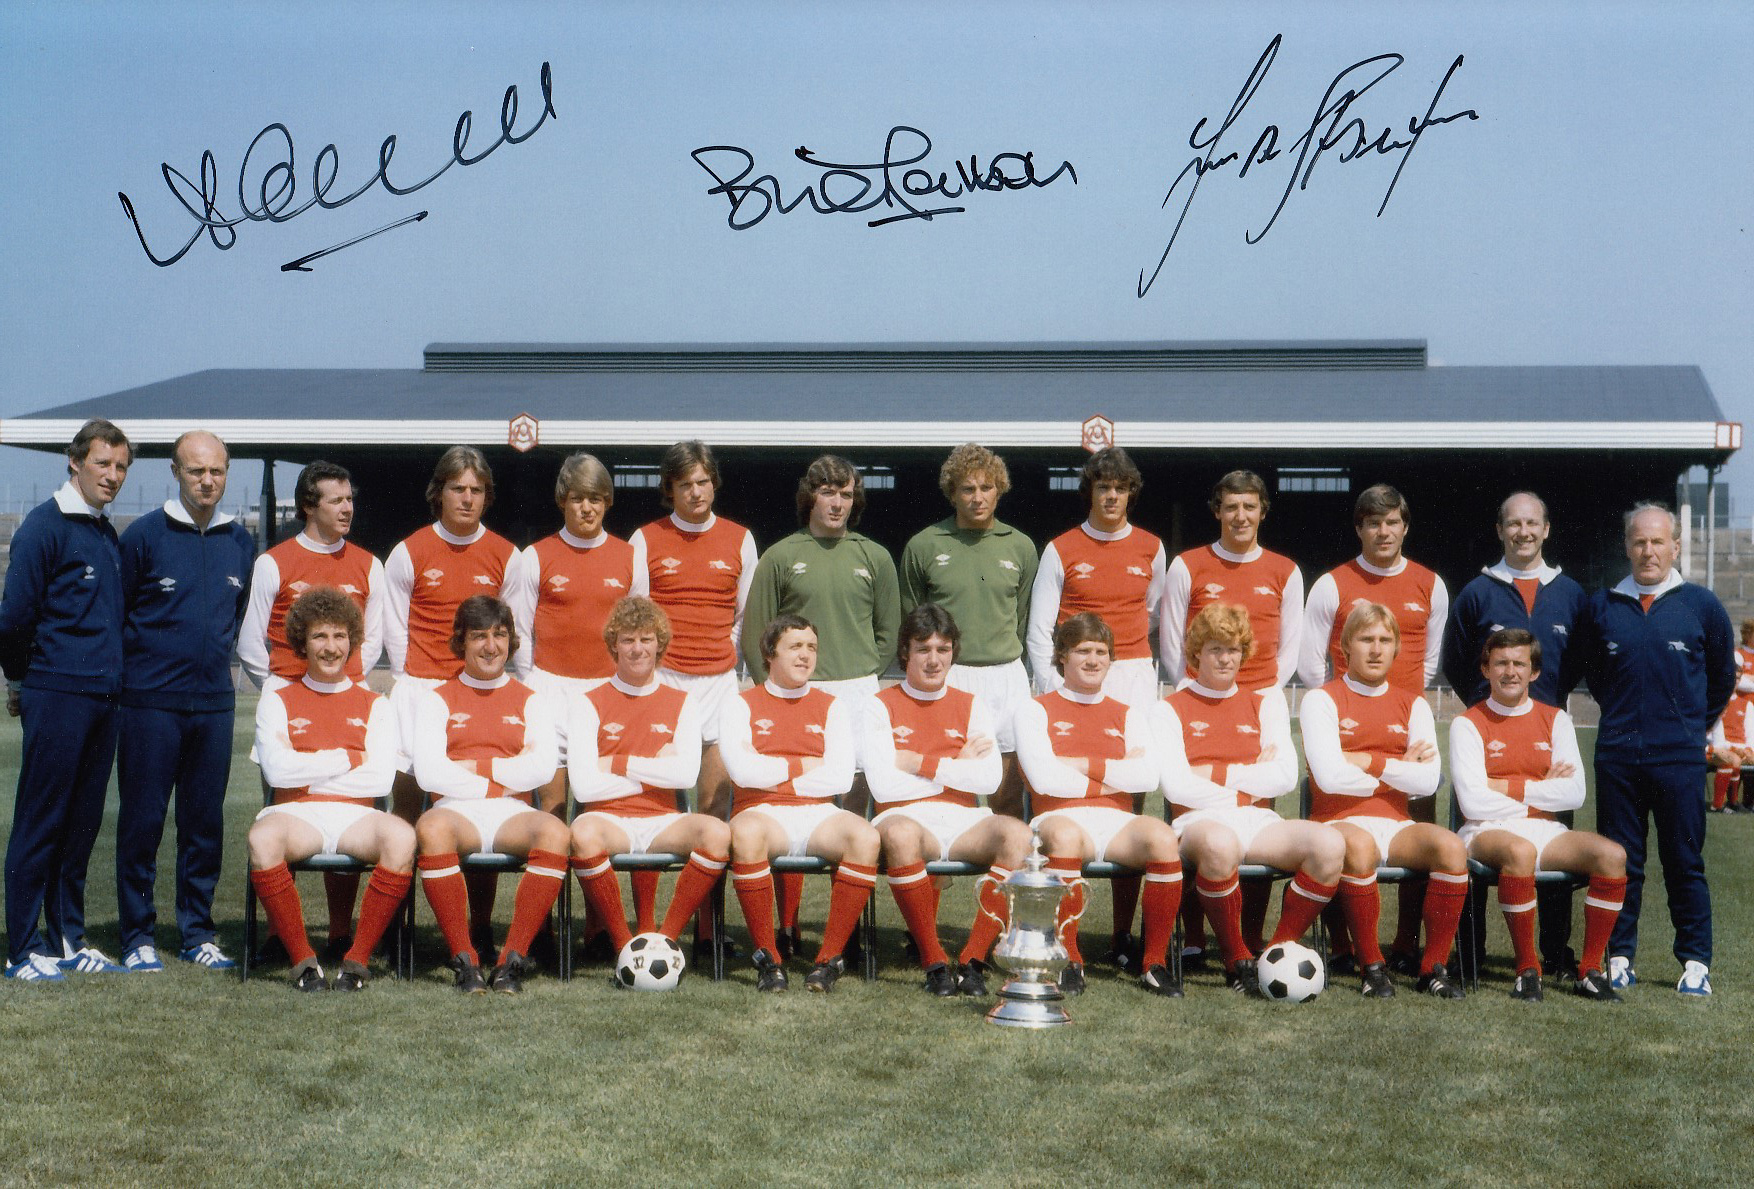 Autographed Arsenal 12 X 8 Photo - Col, Depicting The 1979 Fa Cup Winners - Arsenal, Posing With